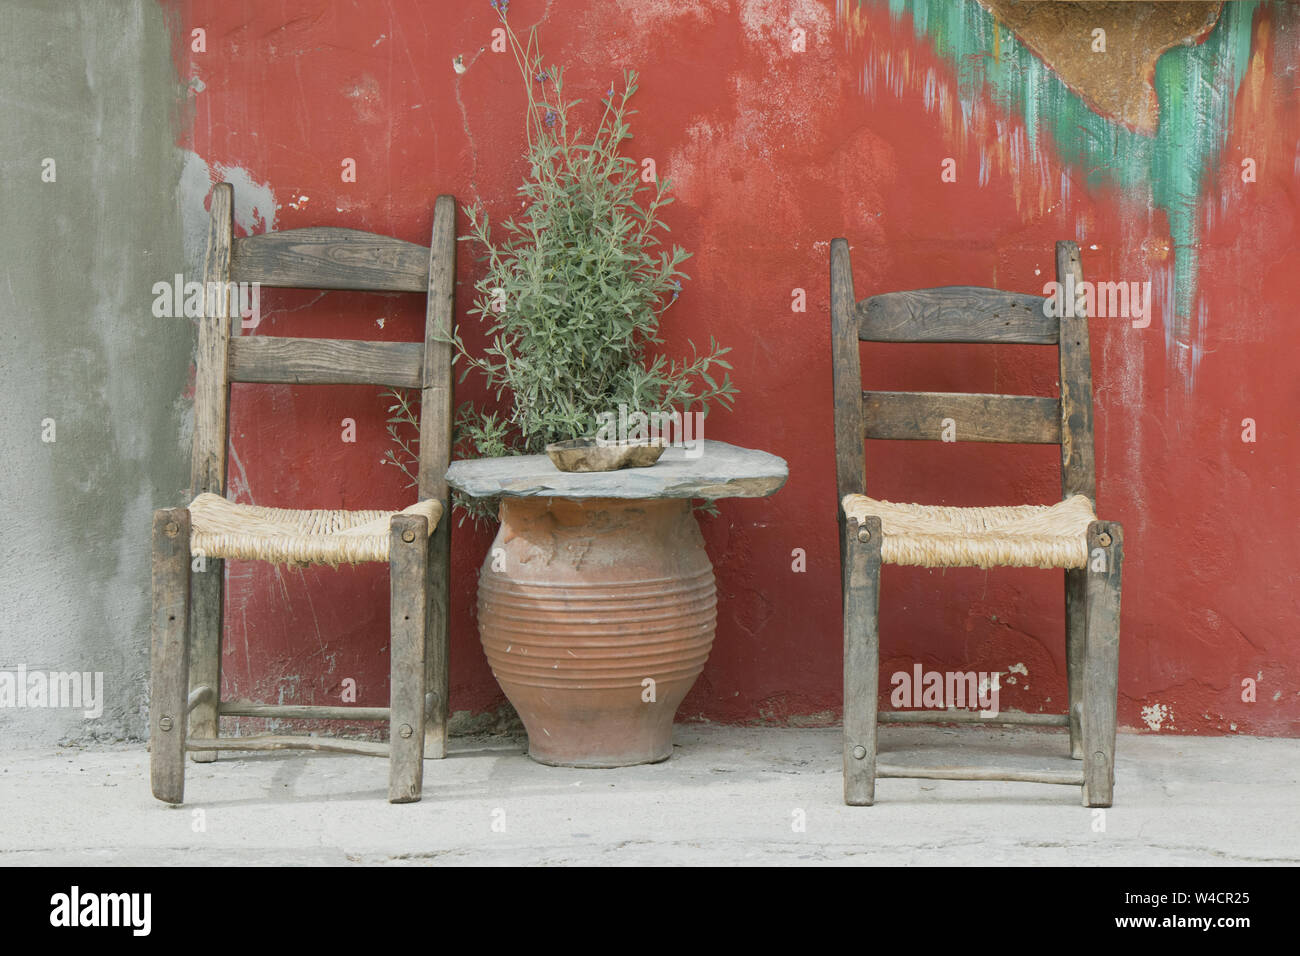 Two chairs on a pavement either side of a Lavender plant in a terracotta pot in Paleochora, South-West Crete, Greece Stock Photo